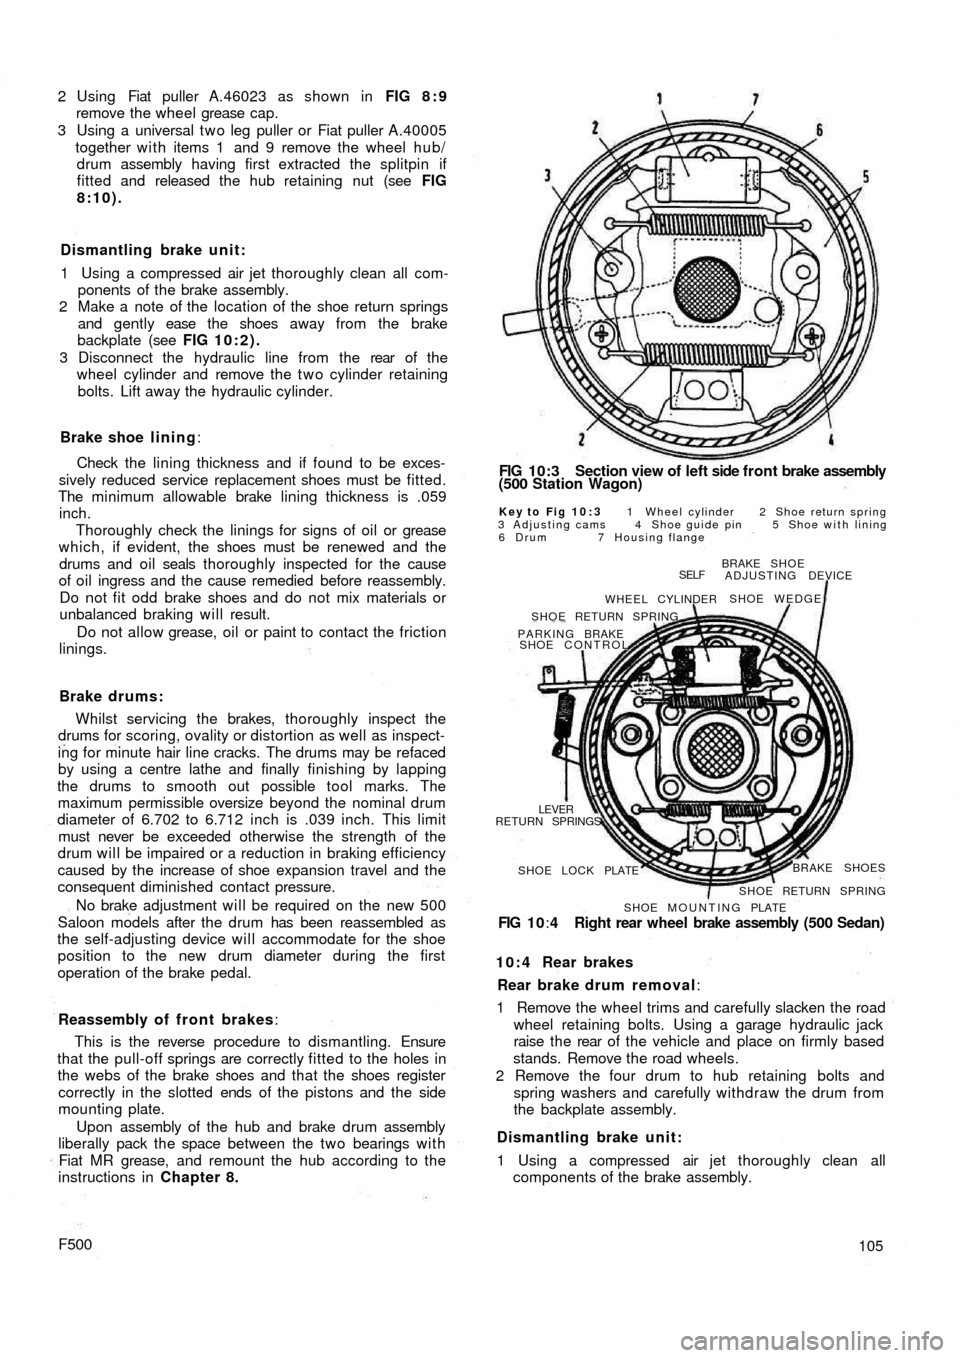 FIAT 500 1971 1.G Workshop Manual 2 Using  Fiat puller A.46023 as shown in FIG 8 : 9
remove the wheel grease cap.
3 Using a universal t w o leg puller or Fiat puller A.40005
together w i t h items 1  and 9 remove the wheel hub/
drum a